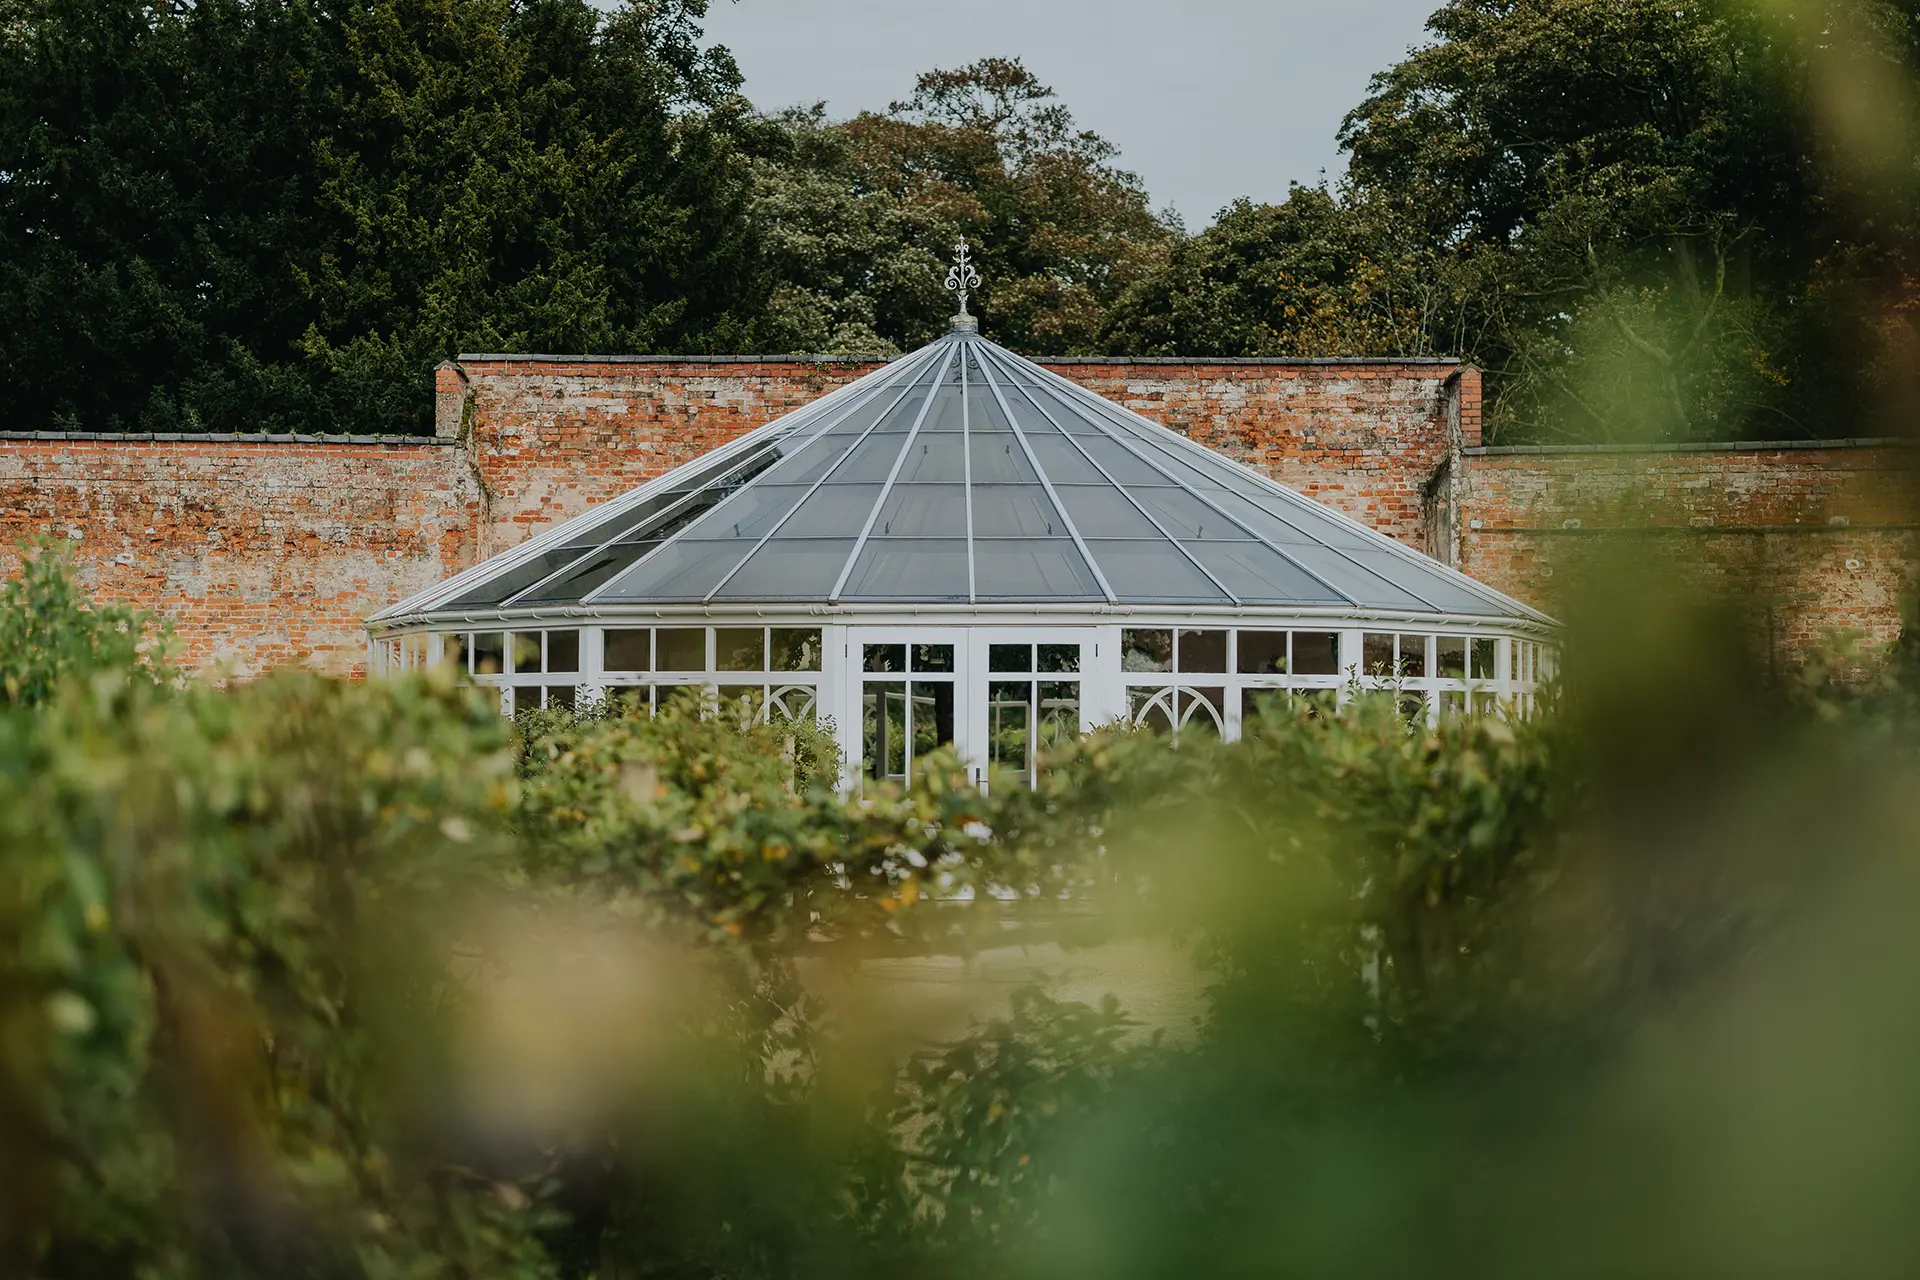 Combermere Abbey the glasshouse